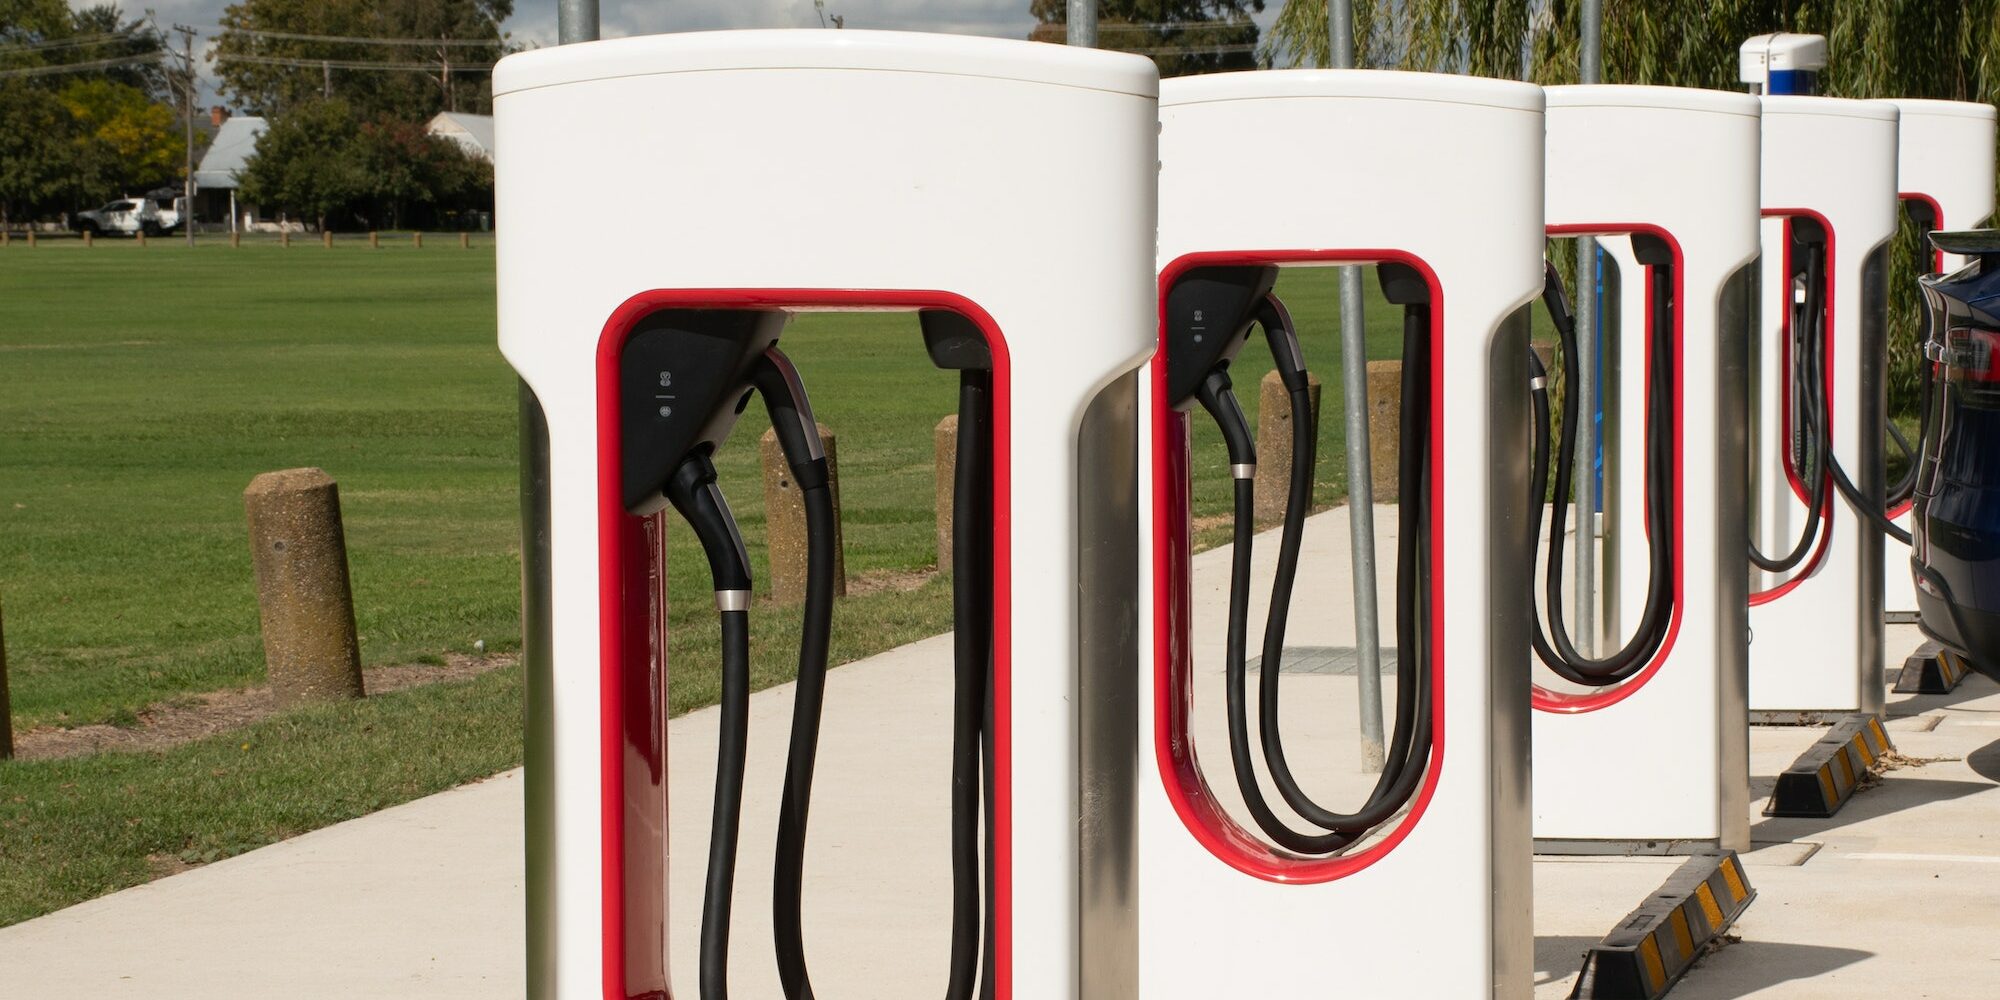 Electric car charger station